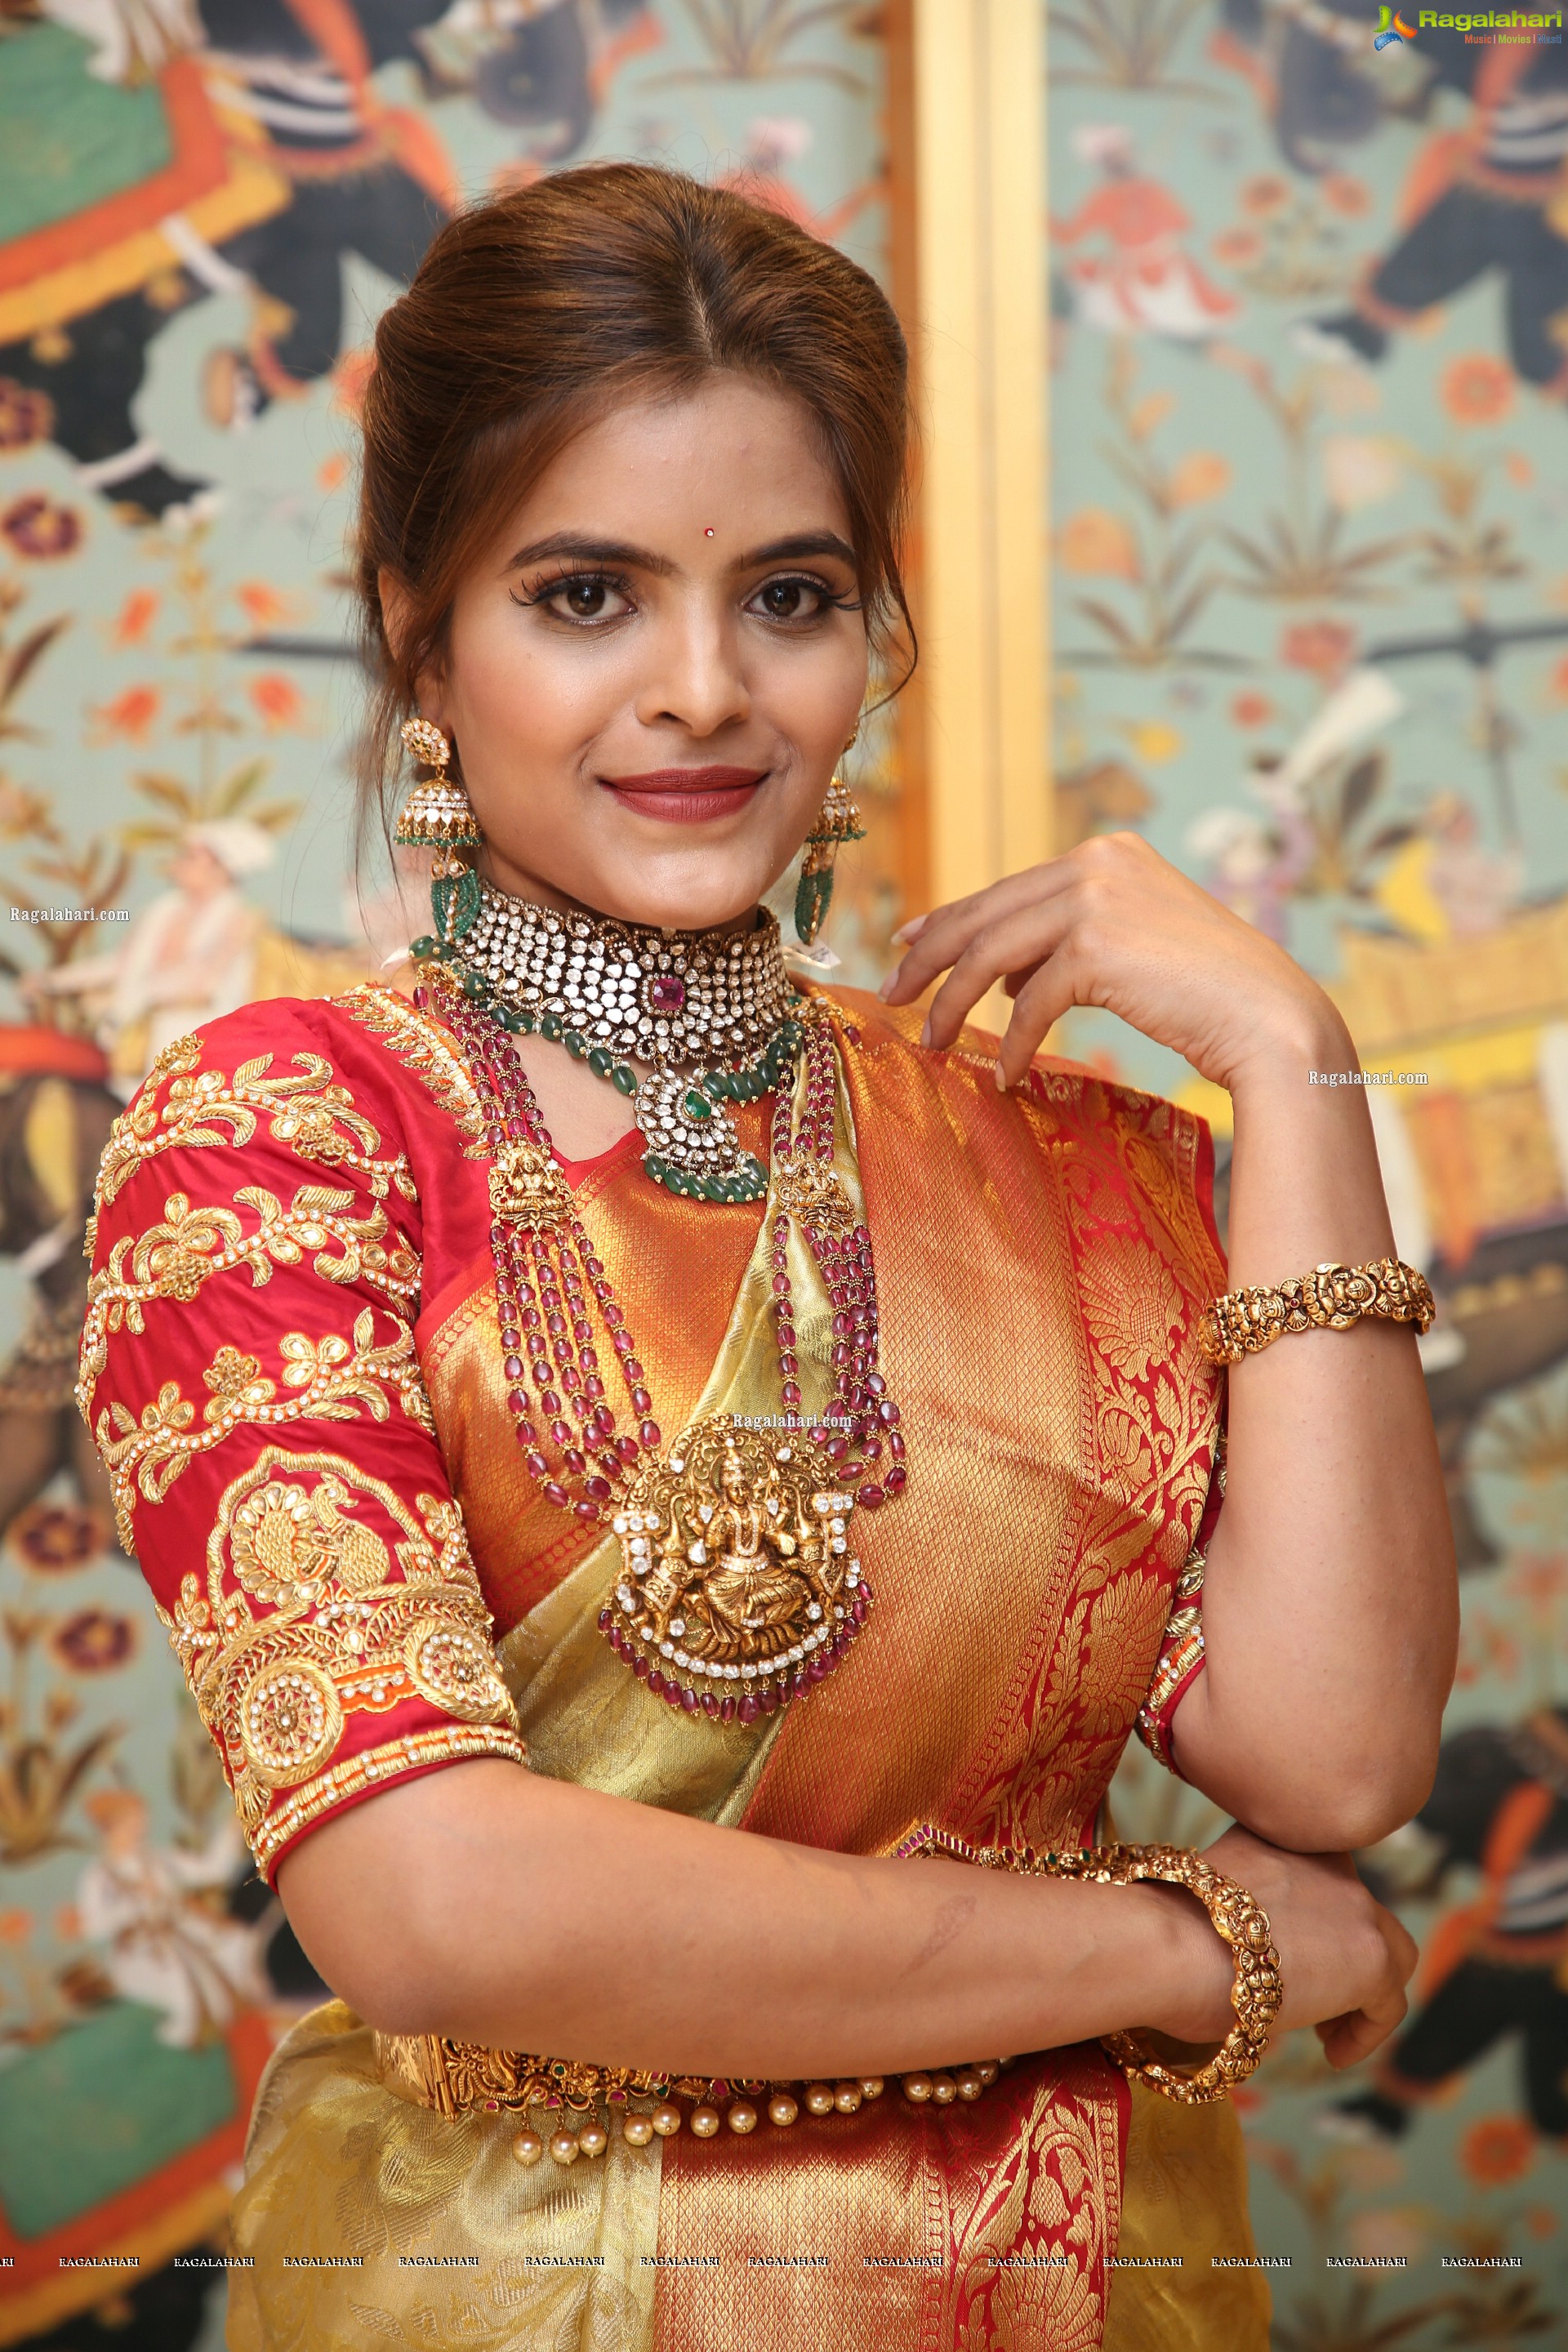 Kusumm Poses With Gold Jewellery, HD Photo Gallery